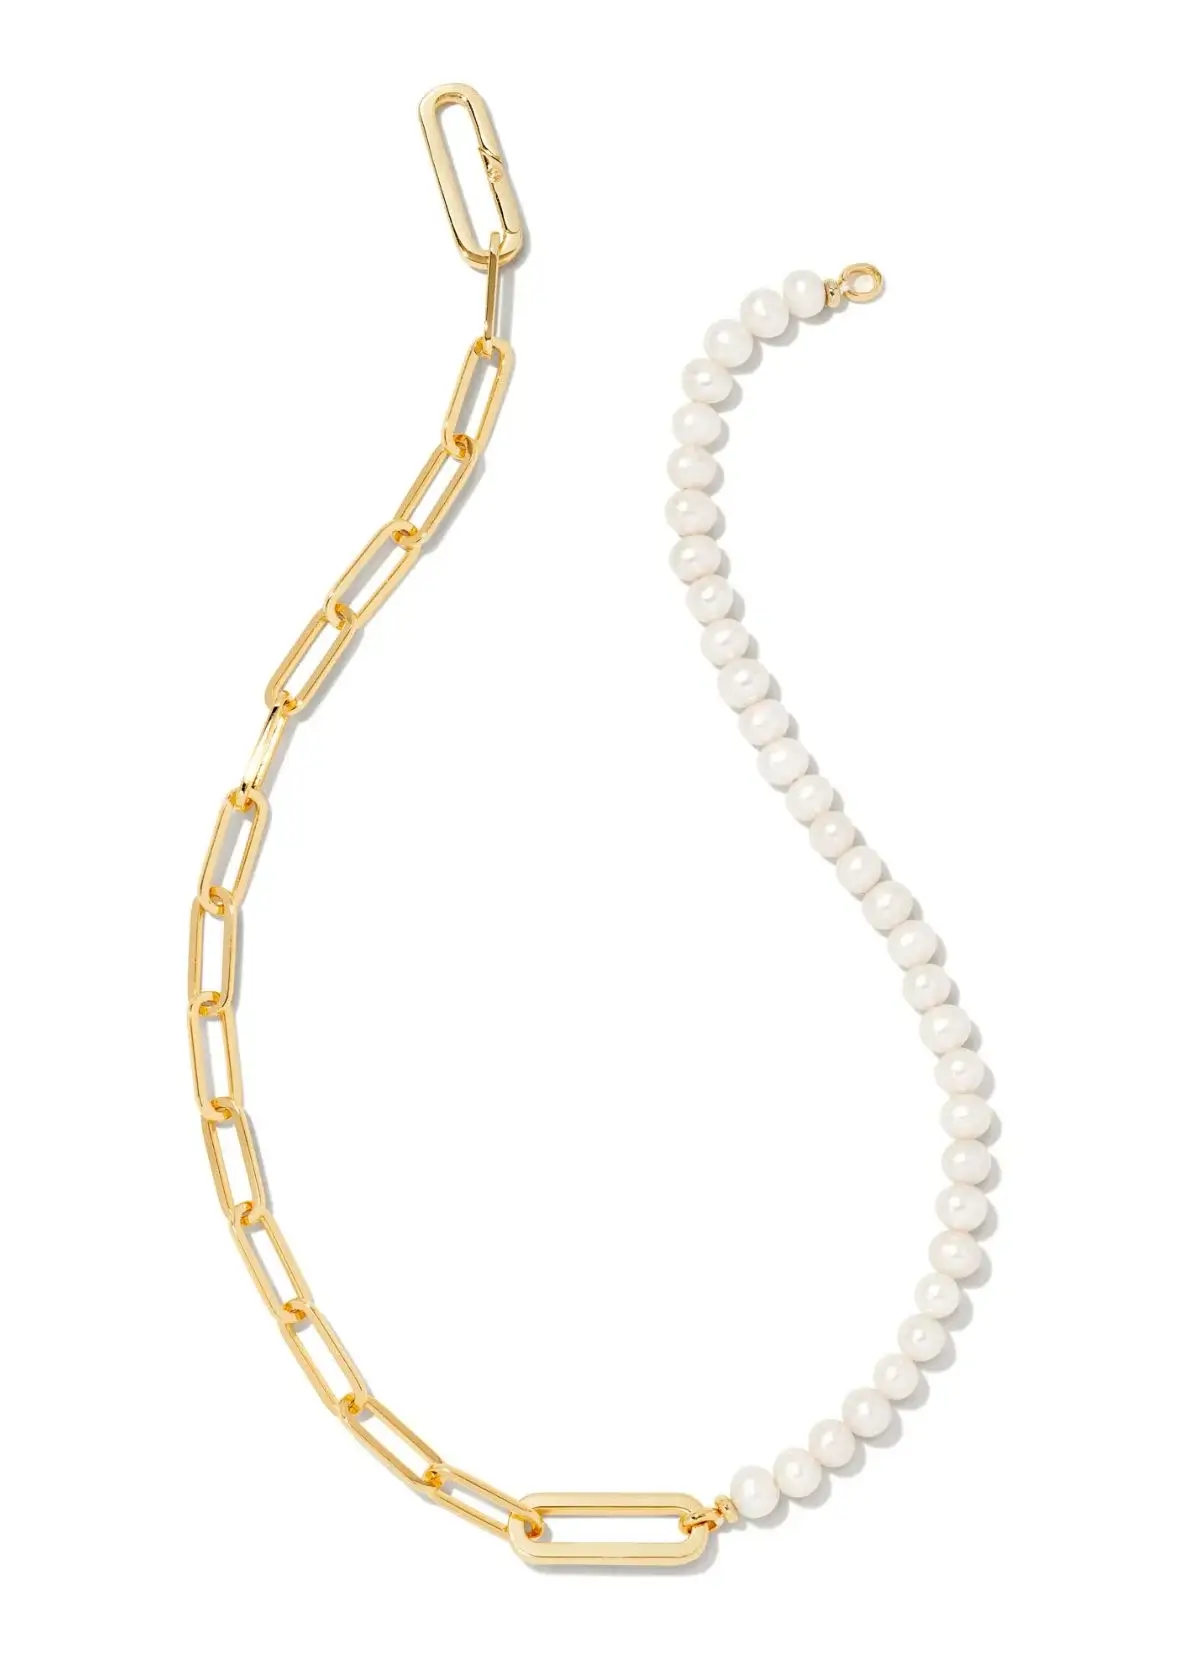 How to Choose the Right Half Pearl Half Chain Necklace?